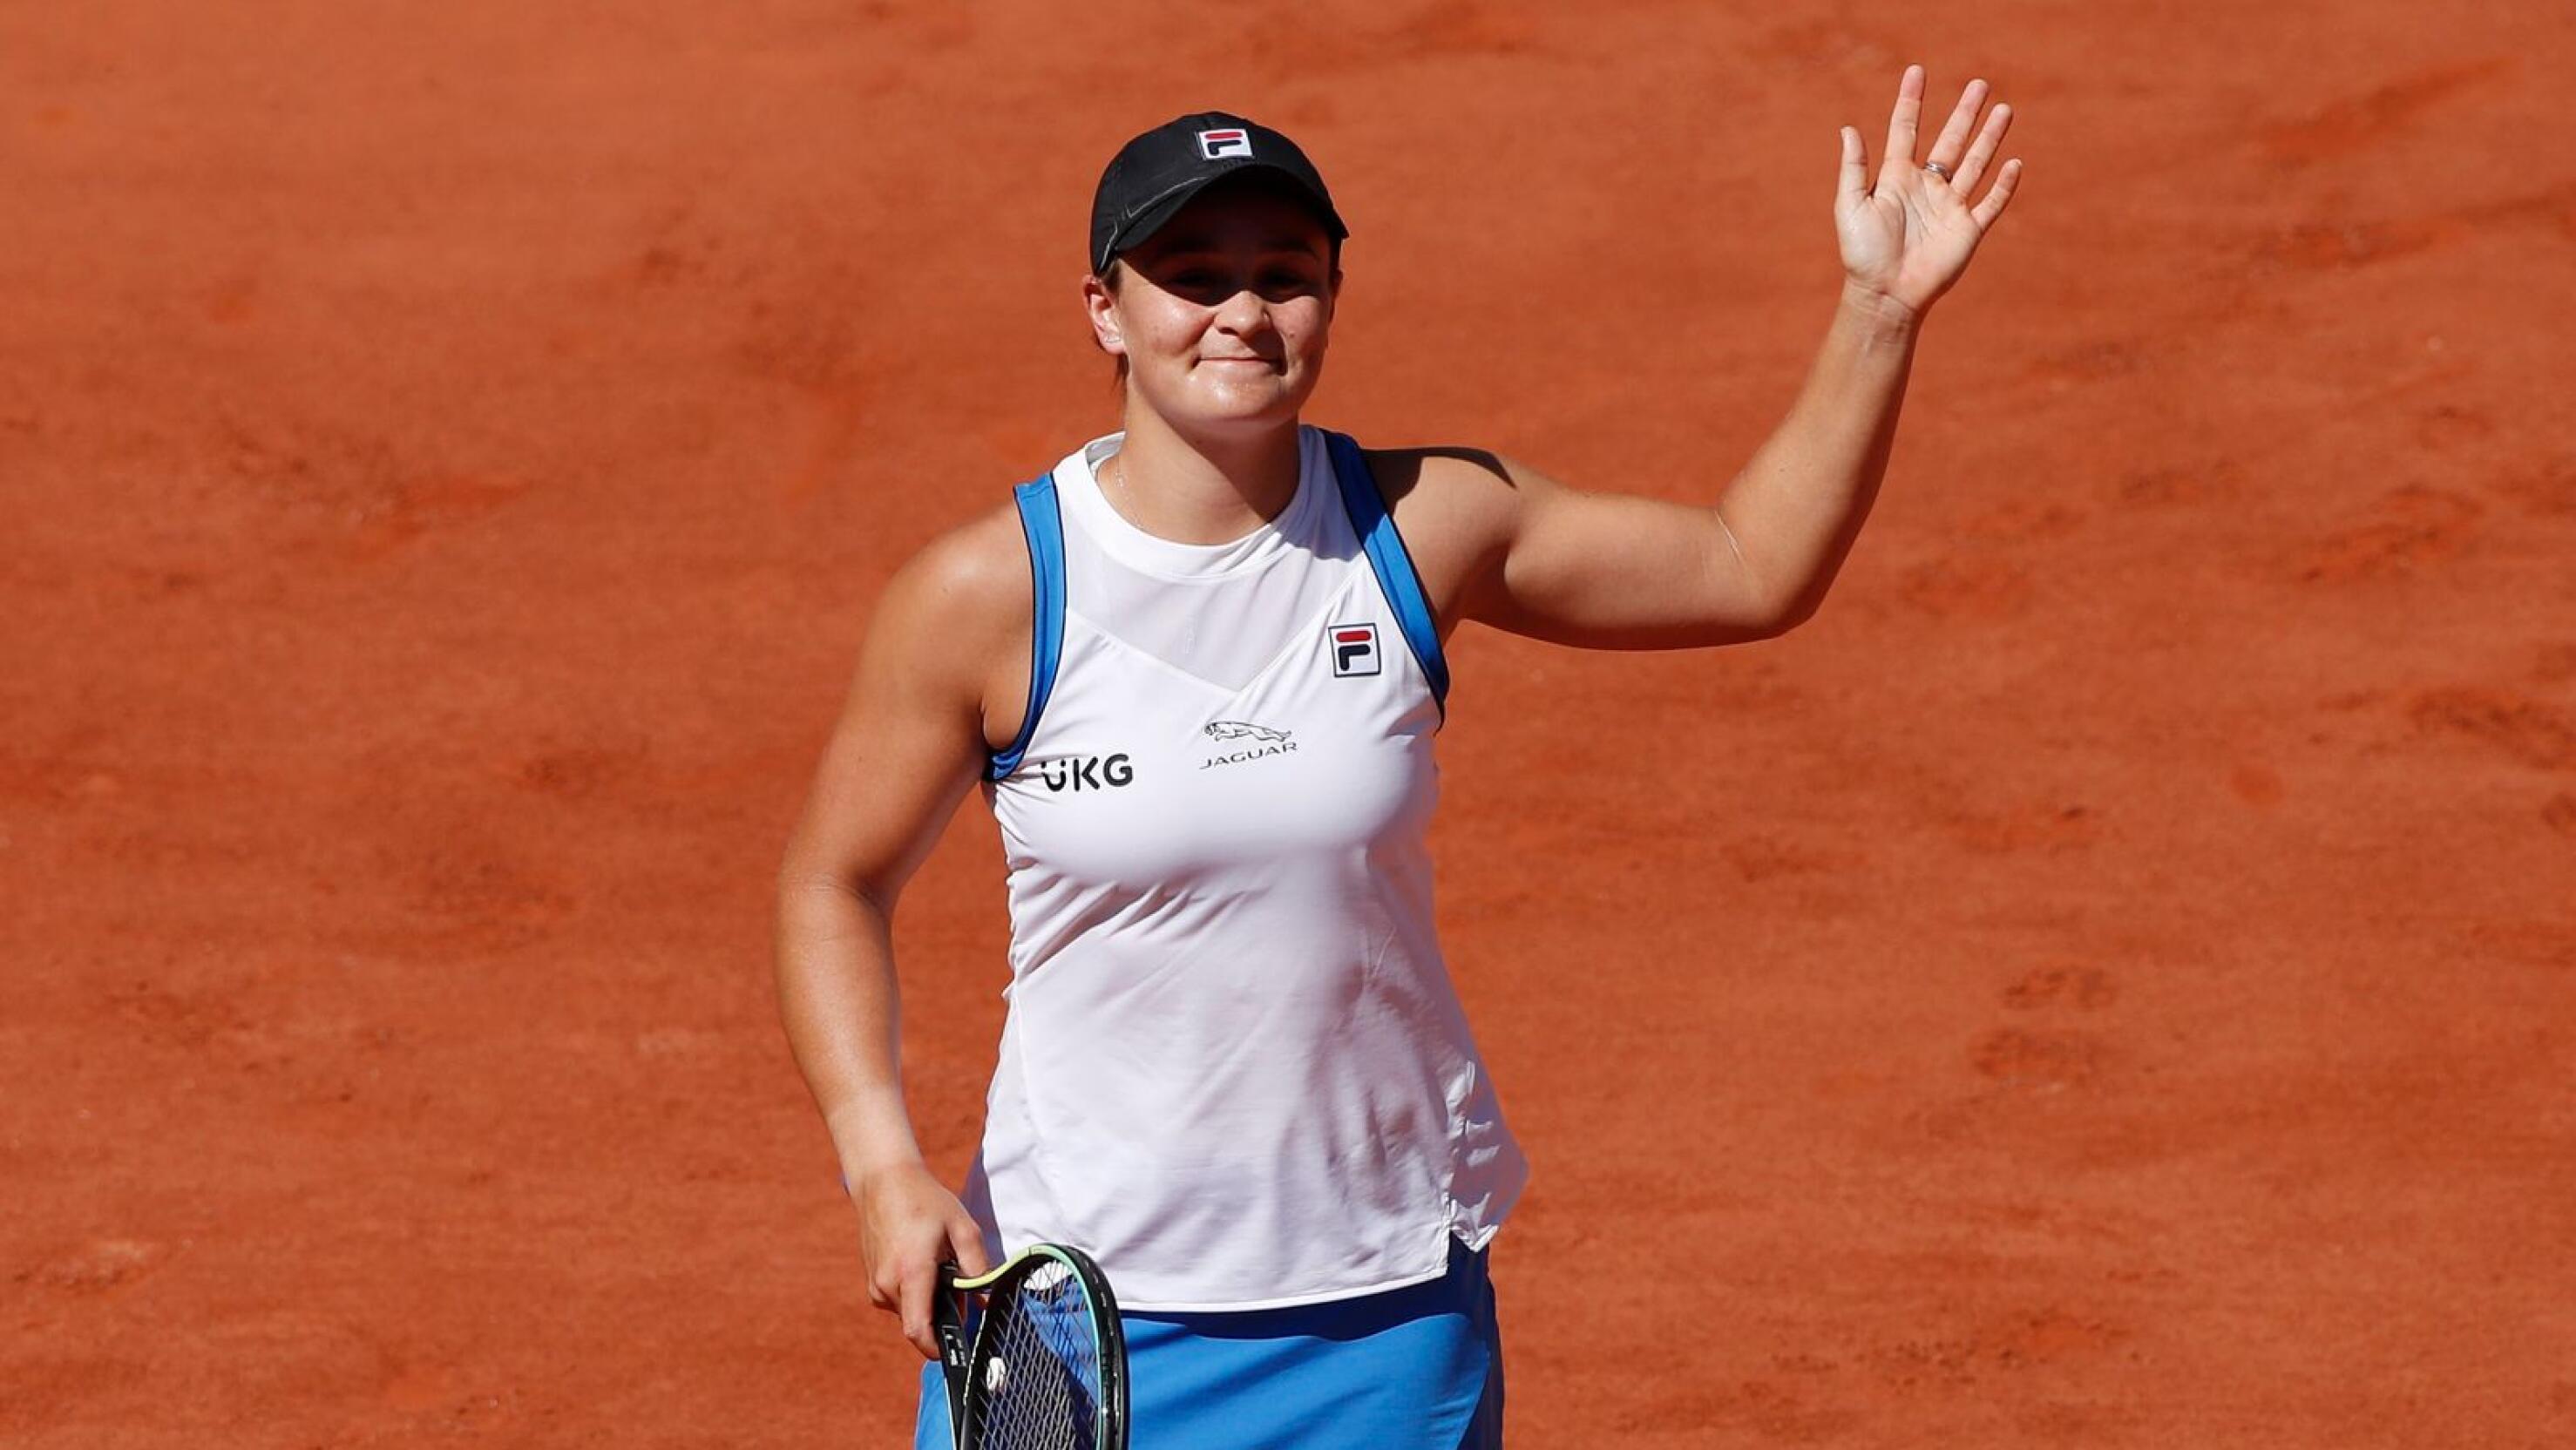 Australia's Ashleigh Barty celebrates after winning her French Open first round match against Bernarda Pera of the U.S. 